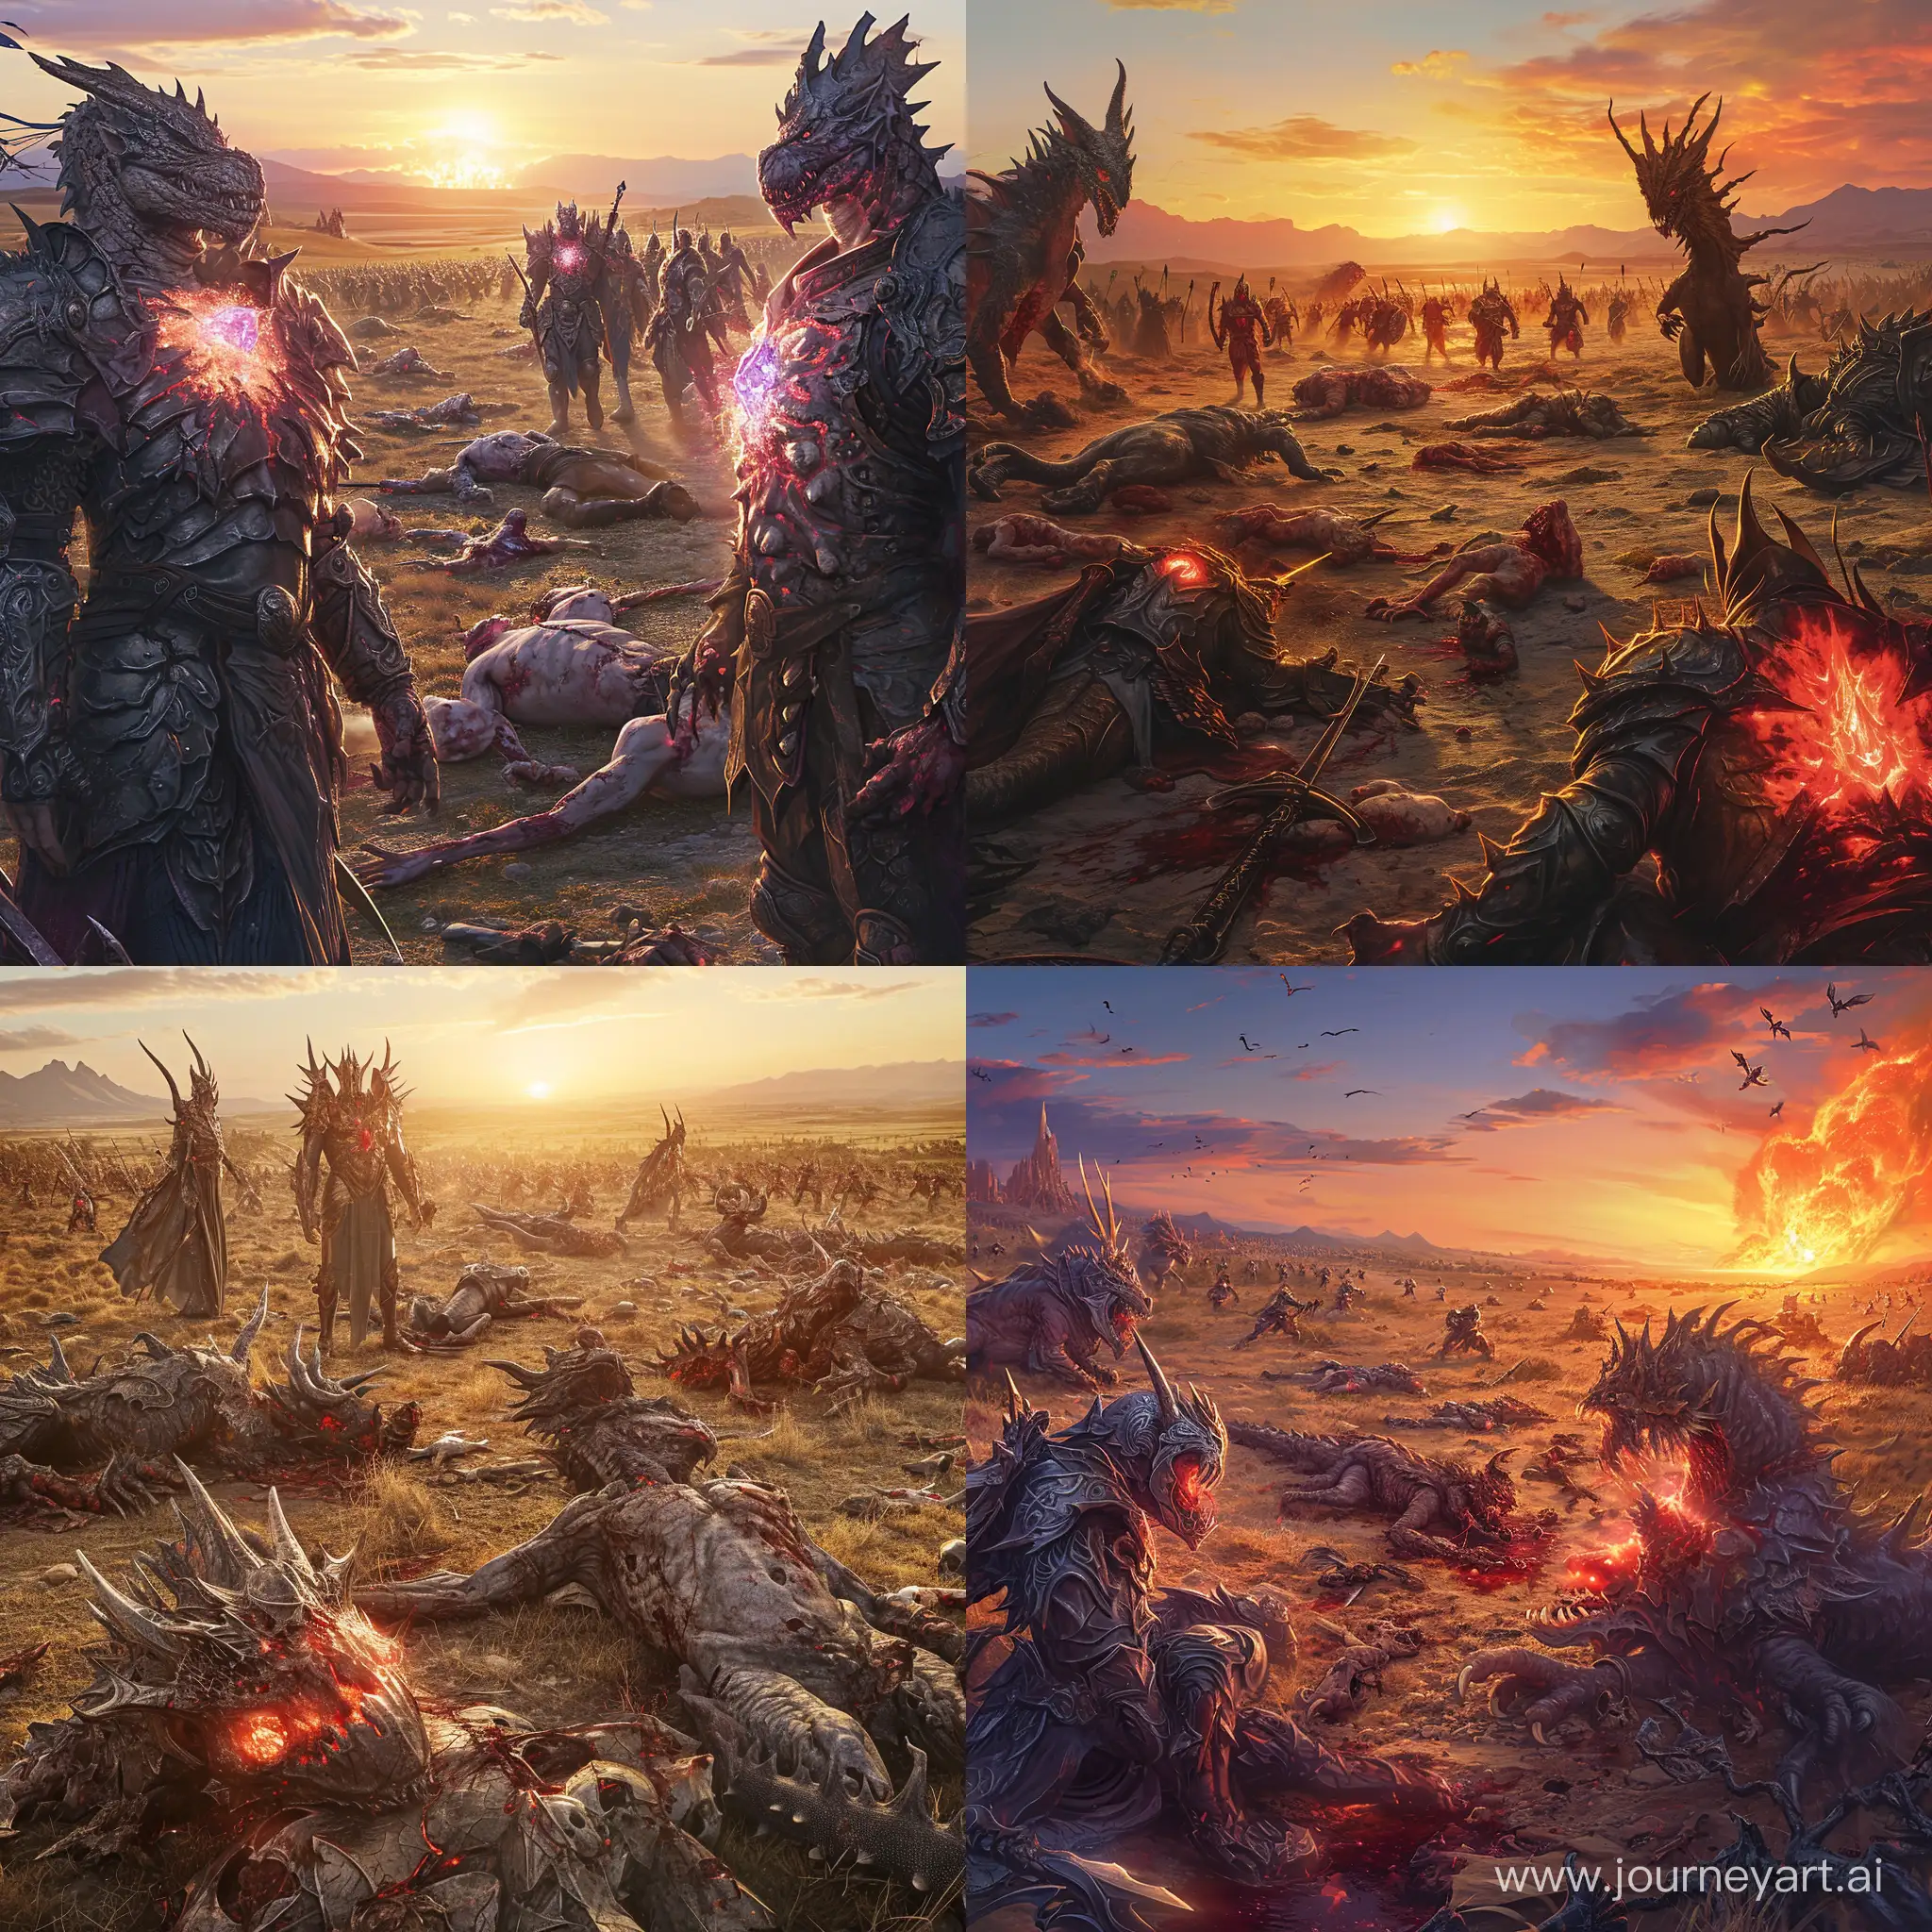 Epic-Battle-Covenant-Army-Clash-with-Fire-Demons-at-Sunset